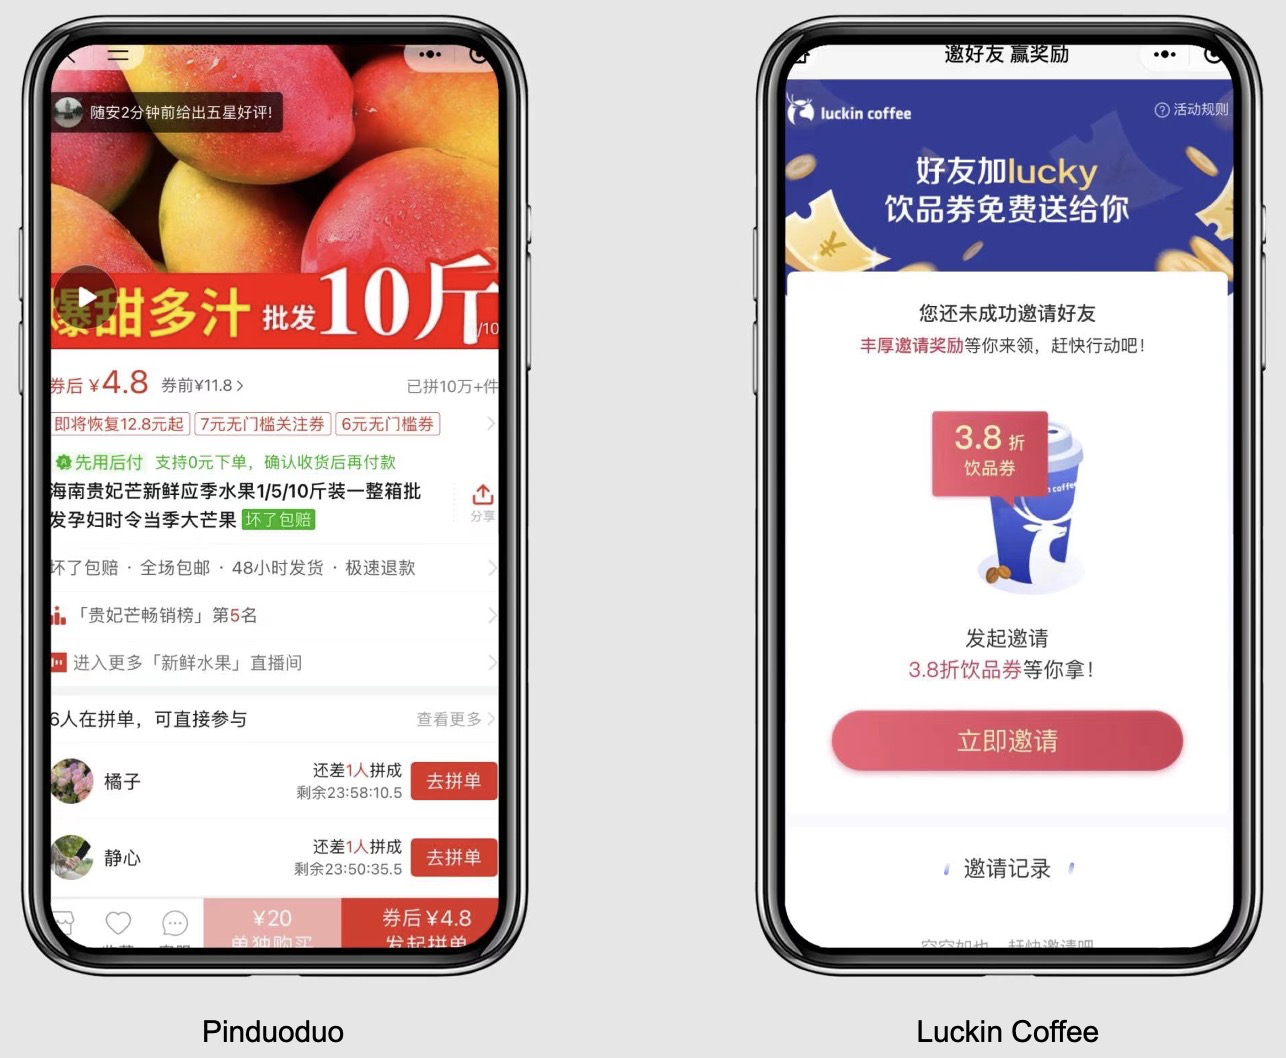 Image of mobile screens showing the apps Pinduoduo and Luckin Coffee